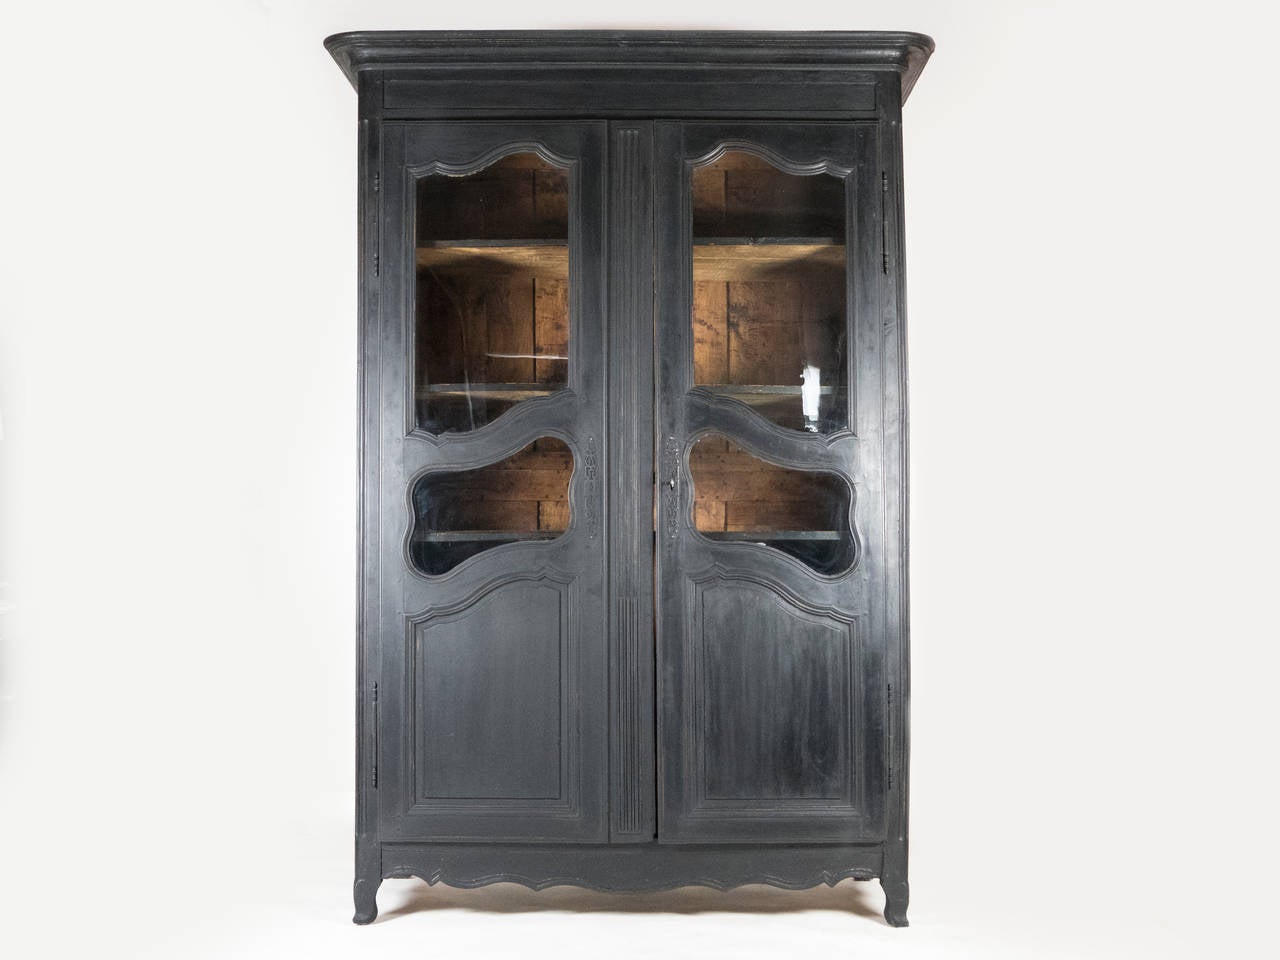 Classic Napoleon III Armoire with 4  glass windows on the door.
Can be used as a bookshelf , wardrobe or curio cabinet.

Beautiful black patina. Four shelves, one shelf with 2 drawers.